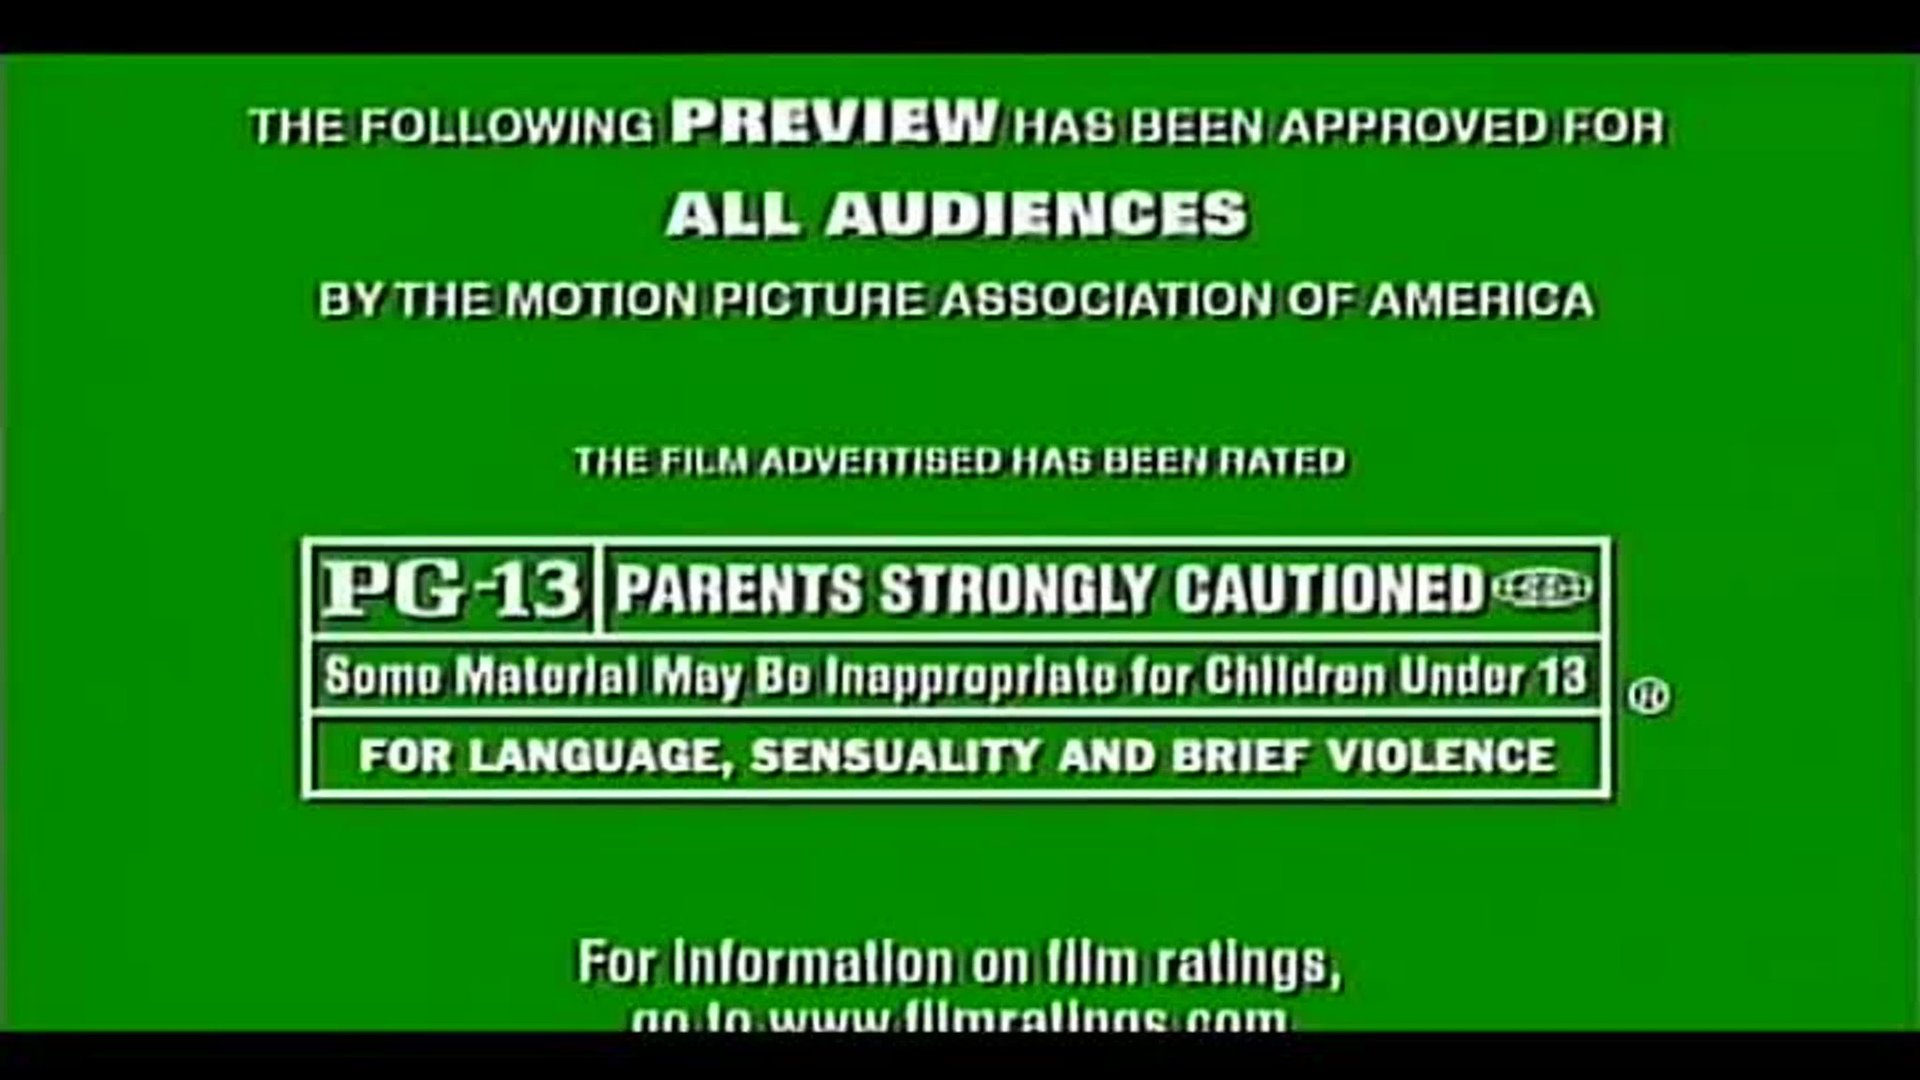 The following Preview has been approved for all audiences PG. Appropriate audiences